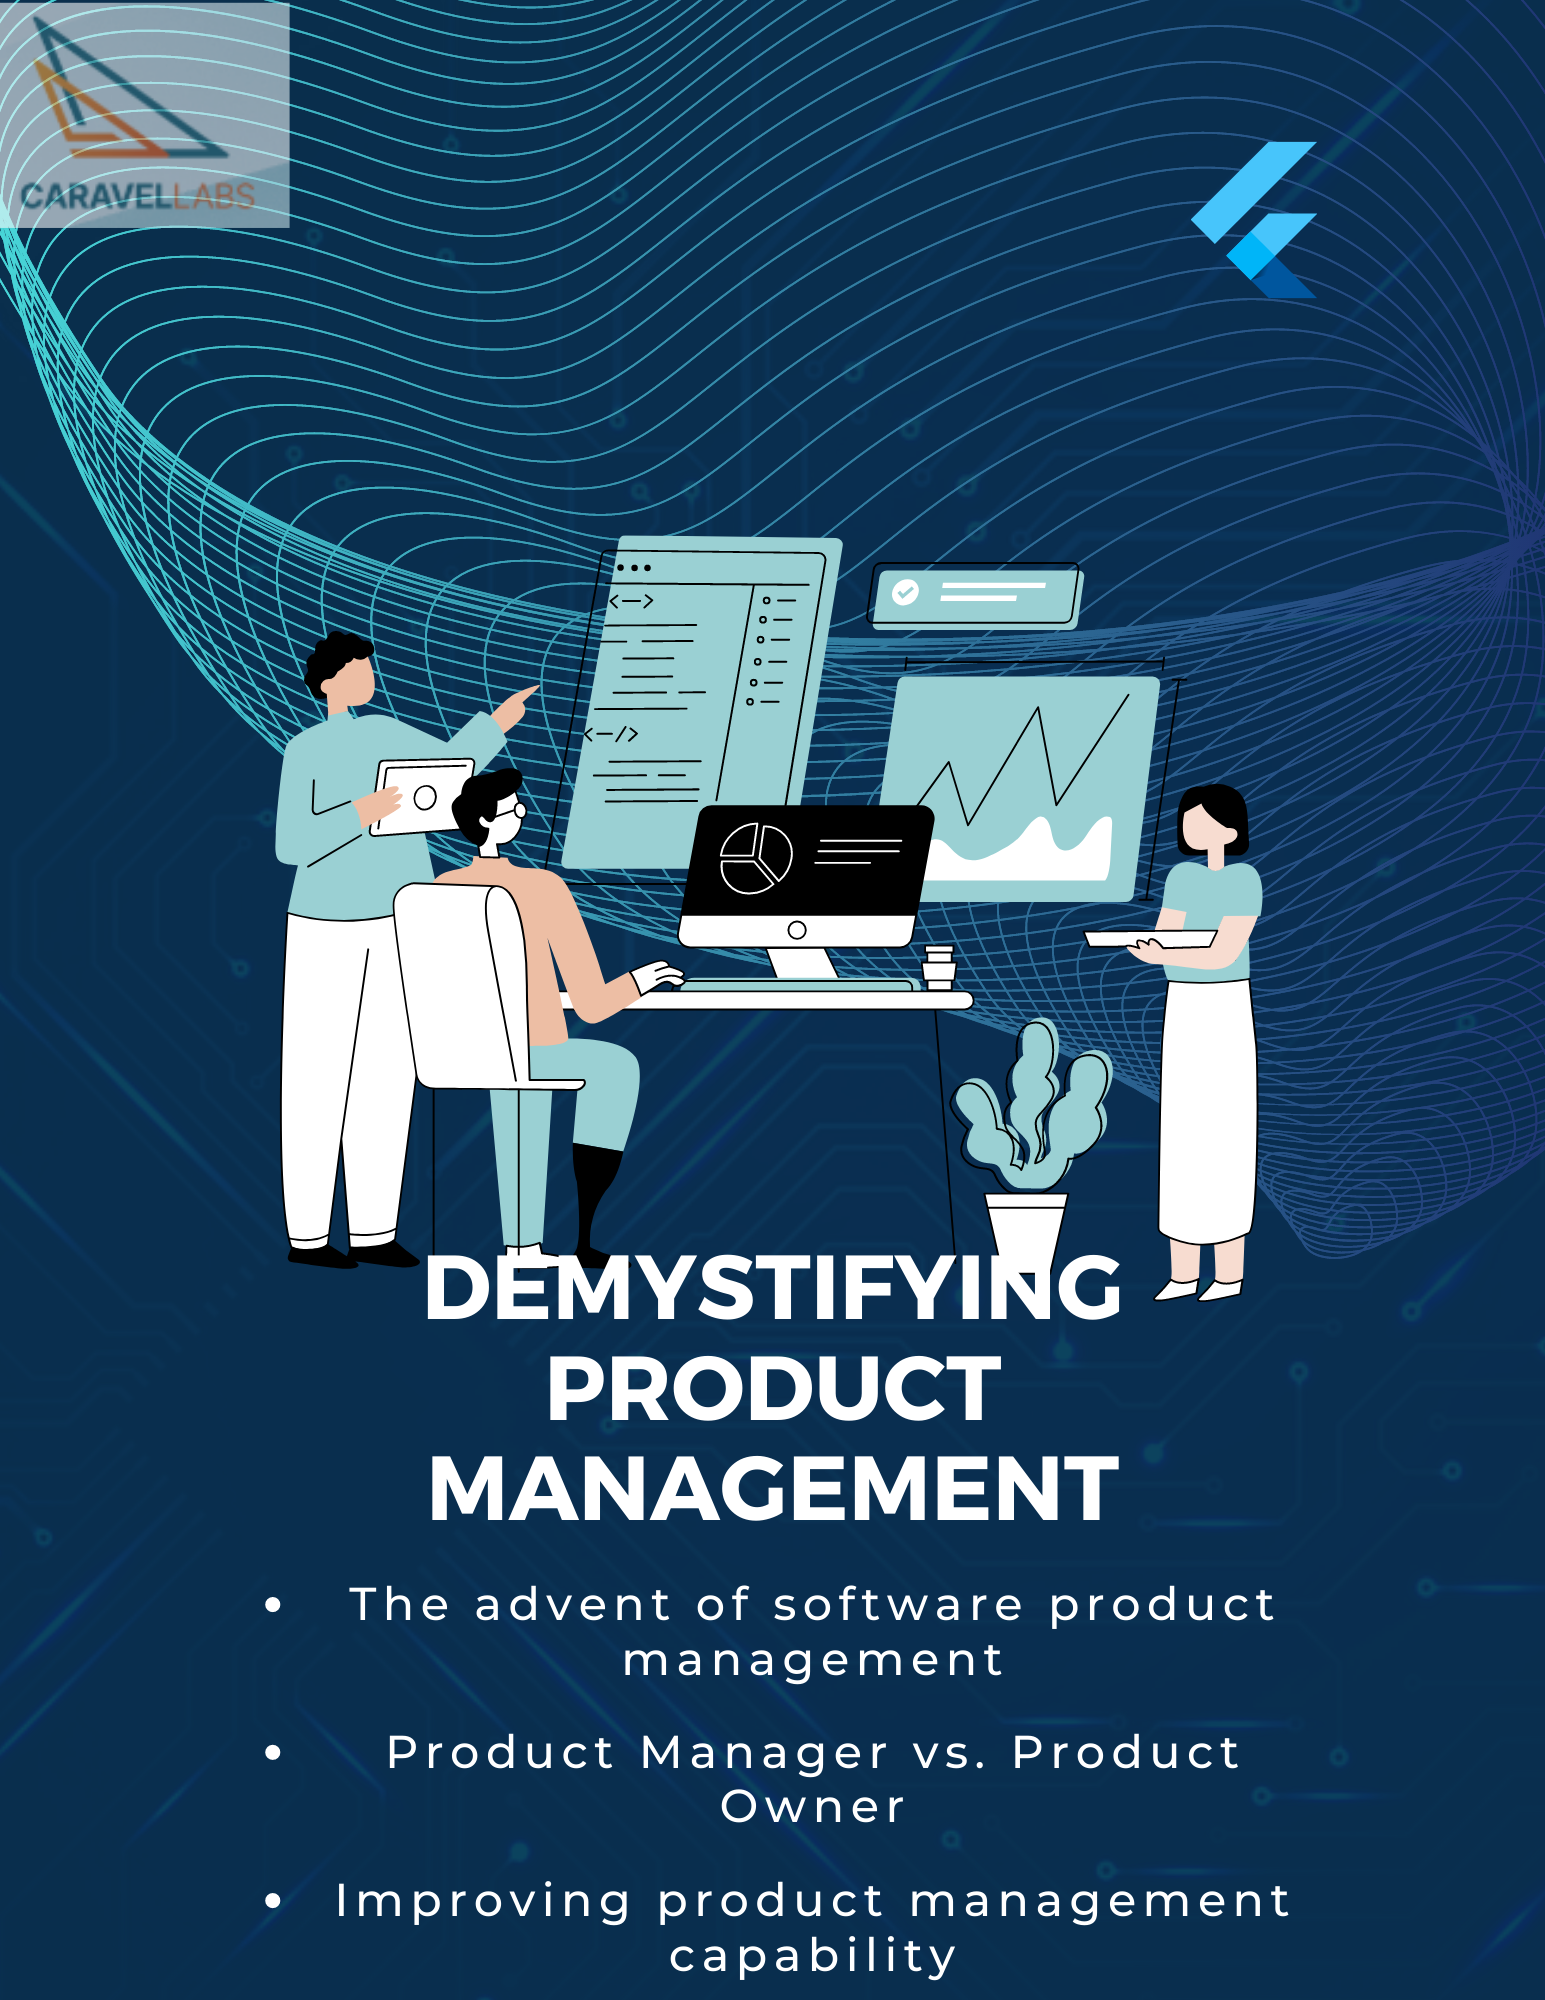 Demystifying Product Management